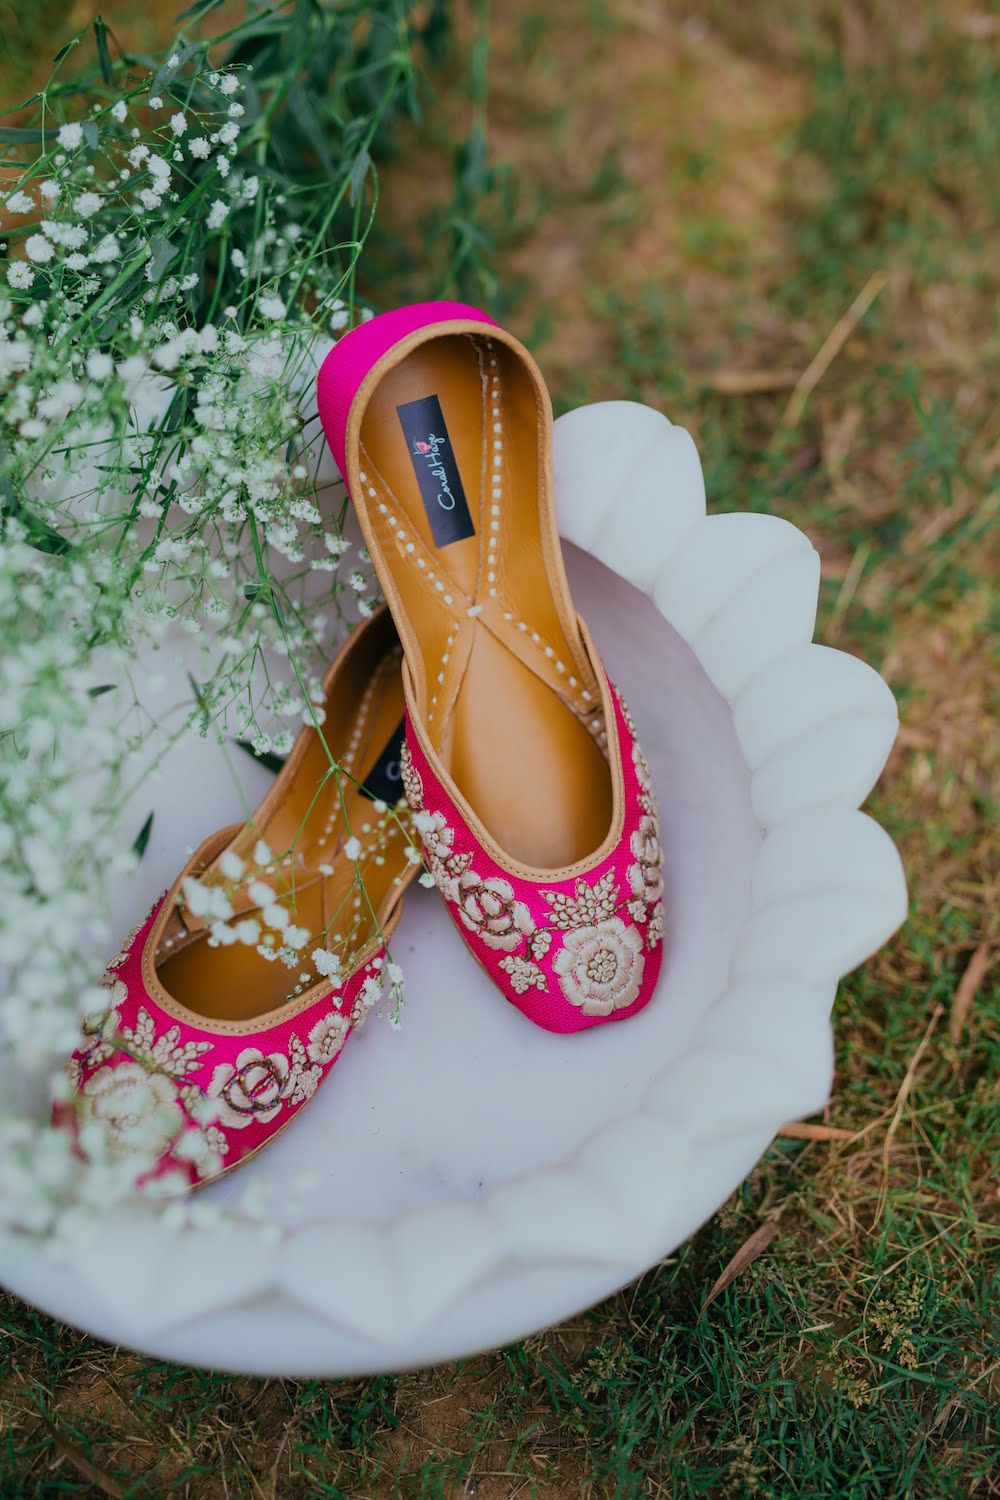 8 Ways To Add That 'Barbie Pink' Touch To Your Wedding